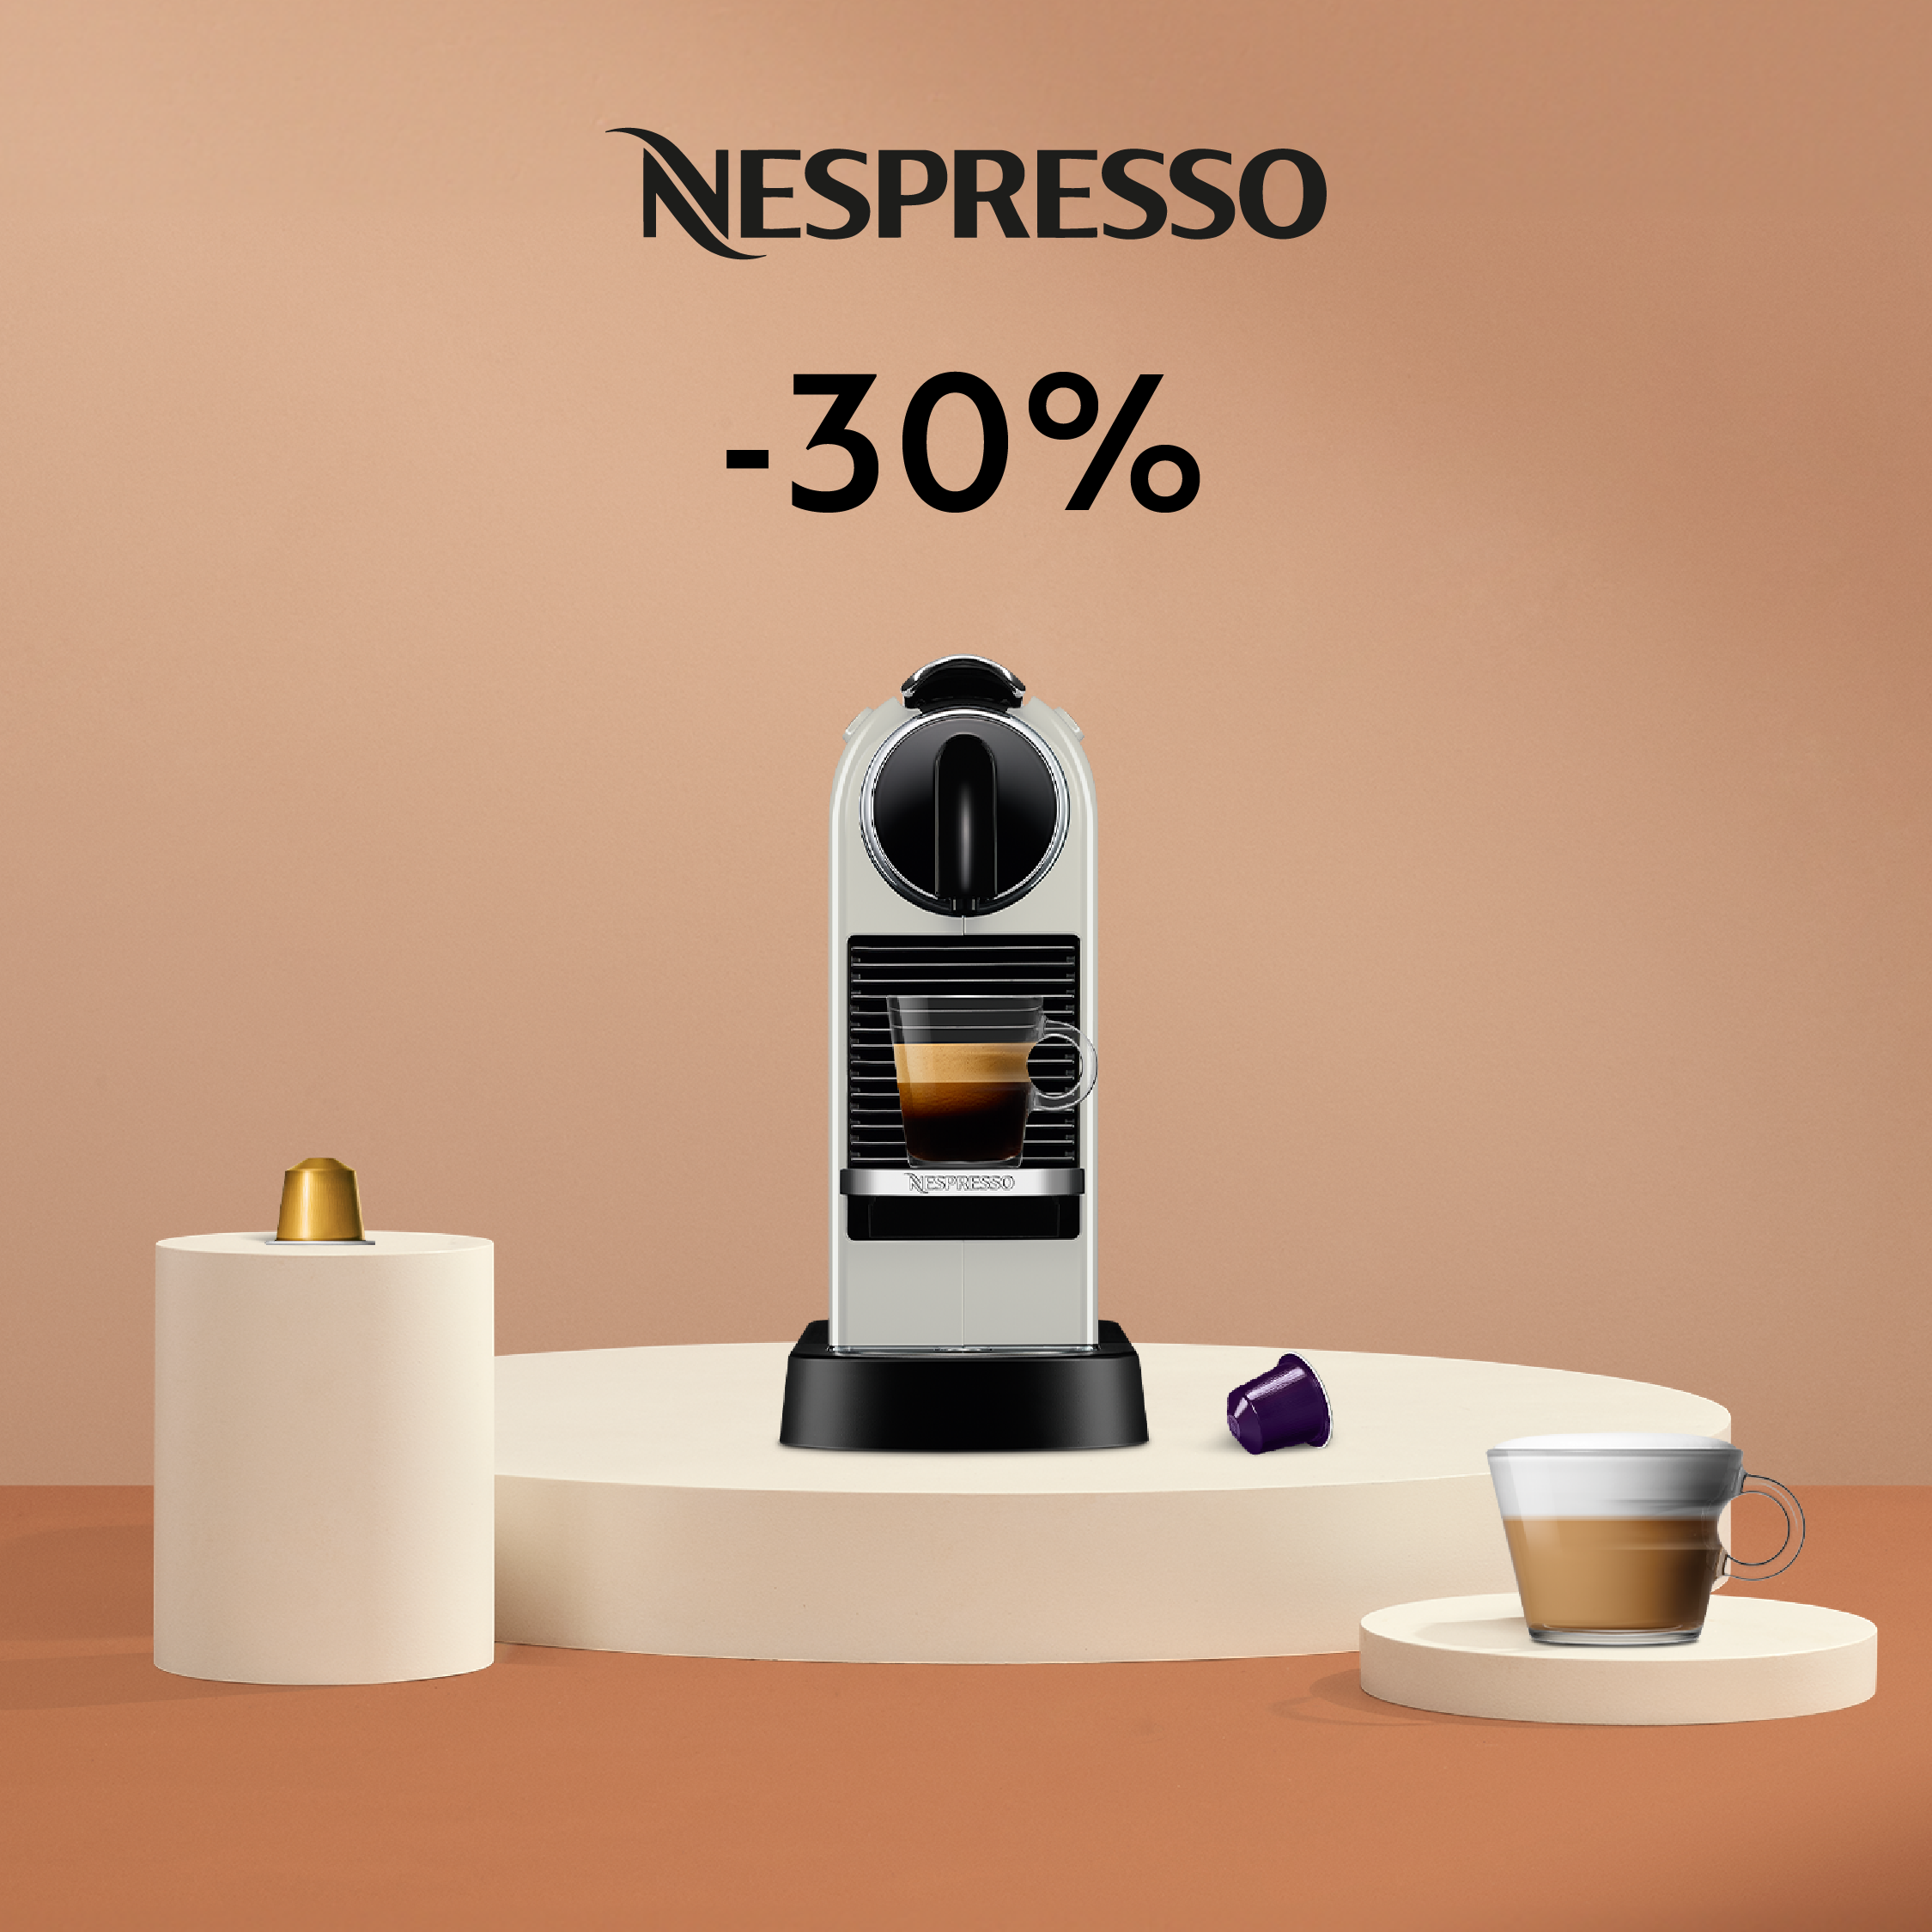 30% DISCOUNT ON THE CITIZ COFFEE MACHINE WHEN YOU BUY 200 CAPSULES!